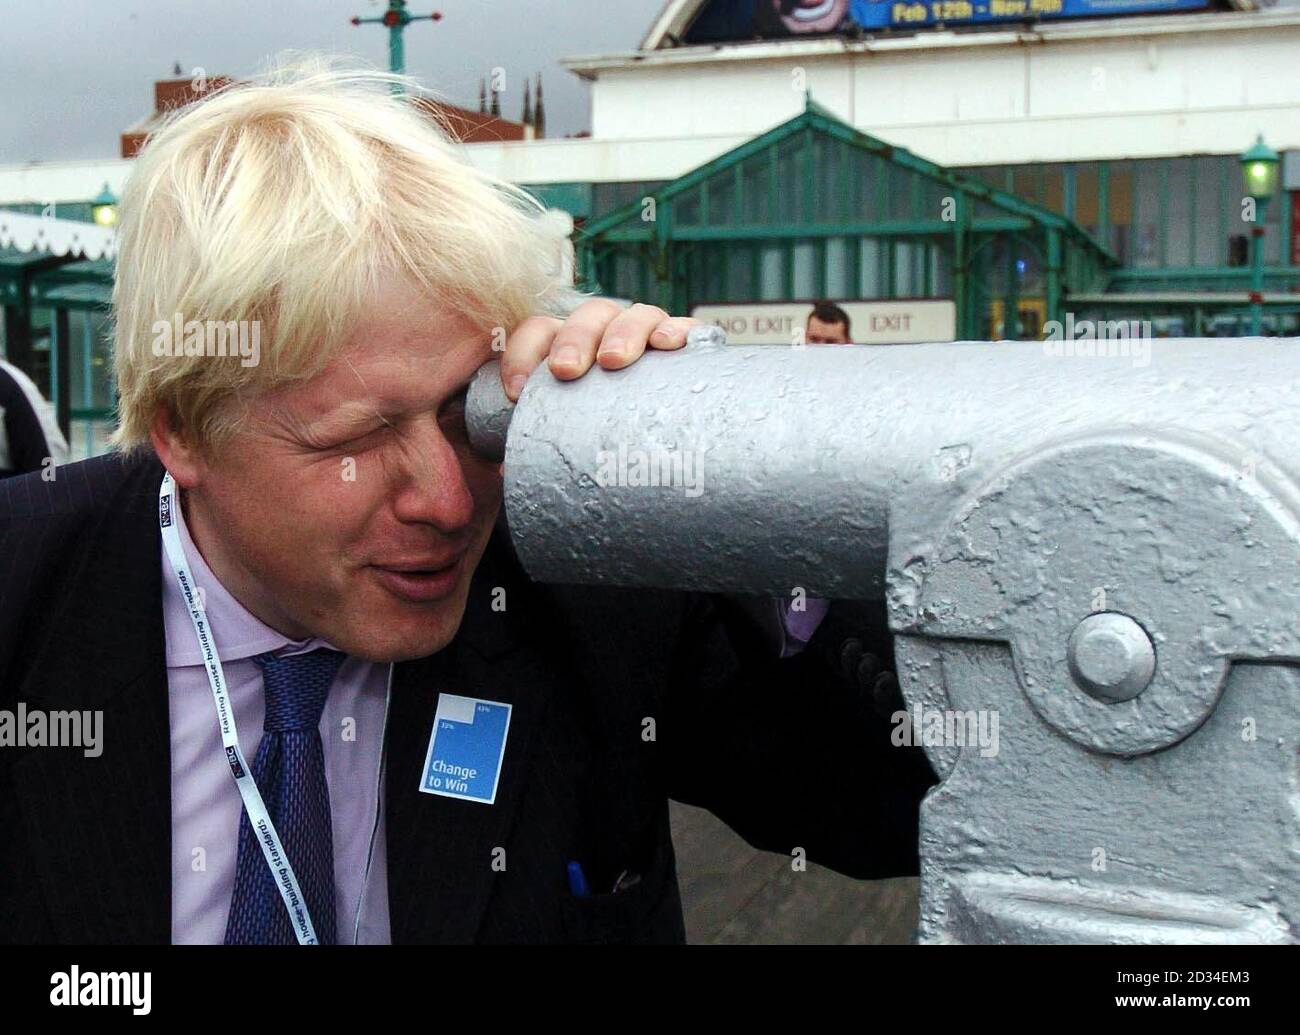 Boris Johnson the Conservative MP for Henley looks through a telescope on the North Pier at Blackpool, Monday 3 October 2005 on the first day of the Conservative Conference. Colourful Tory MP Boris Johnson today said he found the idea that Gordon Brown could defeat any leader of the Conservative Party in a General Election 'absolutely unbelievable'. The member for Henley and Spectator editor, who is backing David Cameron's leadership bid, said that he was not in favour of would-be leaders trying to mimic Tony Blair but called for a new approach to Conservatism. Speaking at a conference fringe Stock Photo